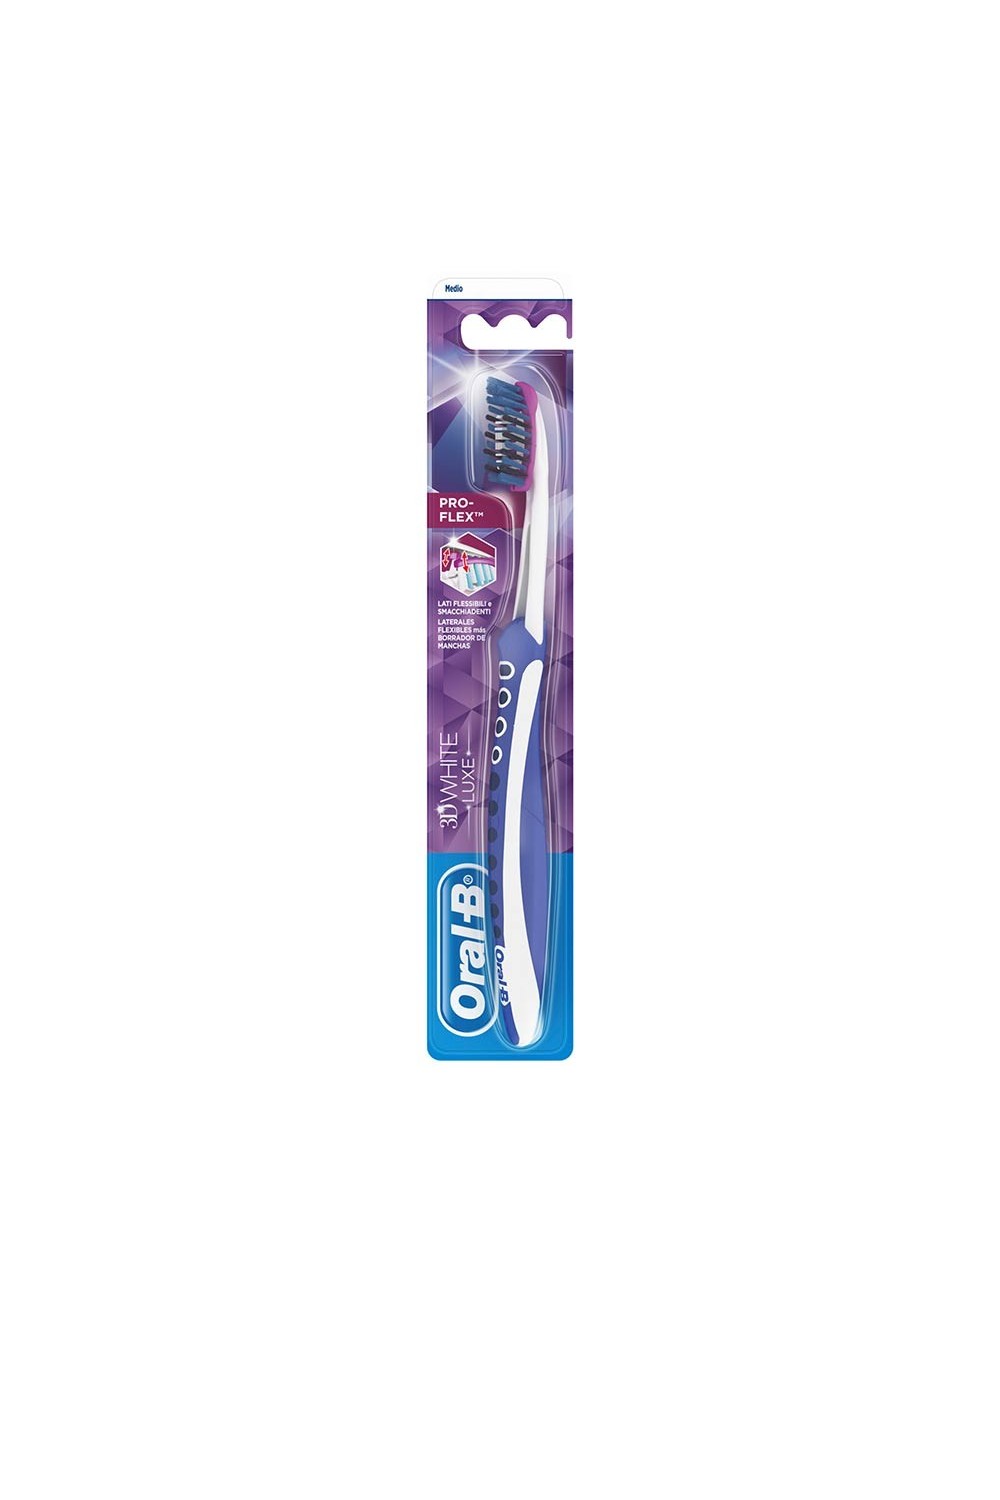 Oral-B 3D White Luxe Pro-Flex Toothbrush